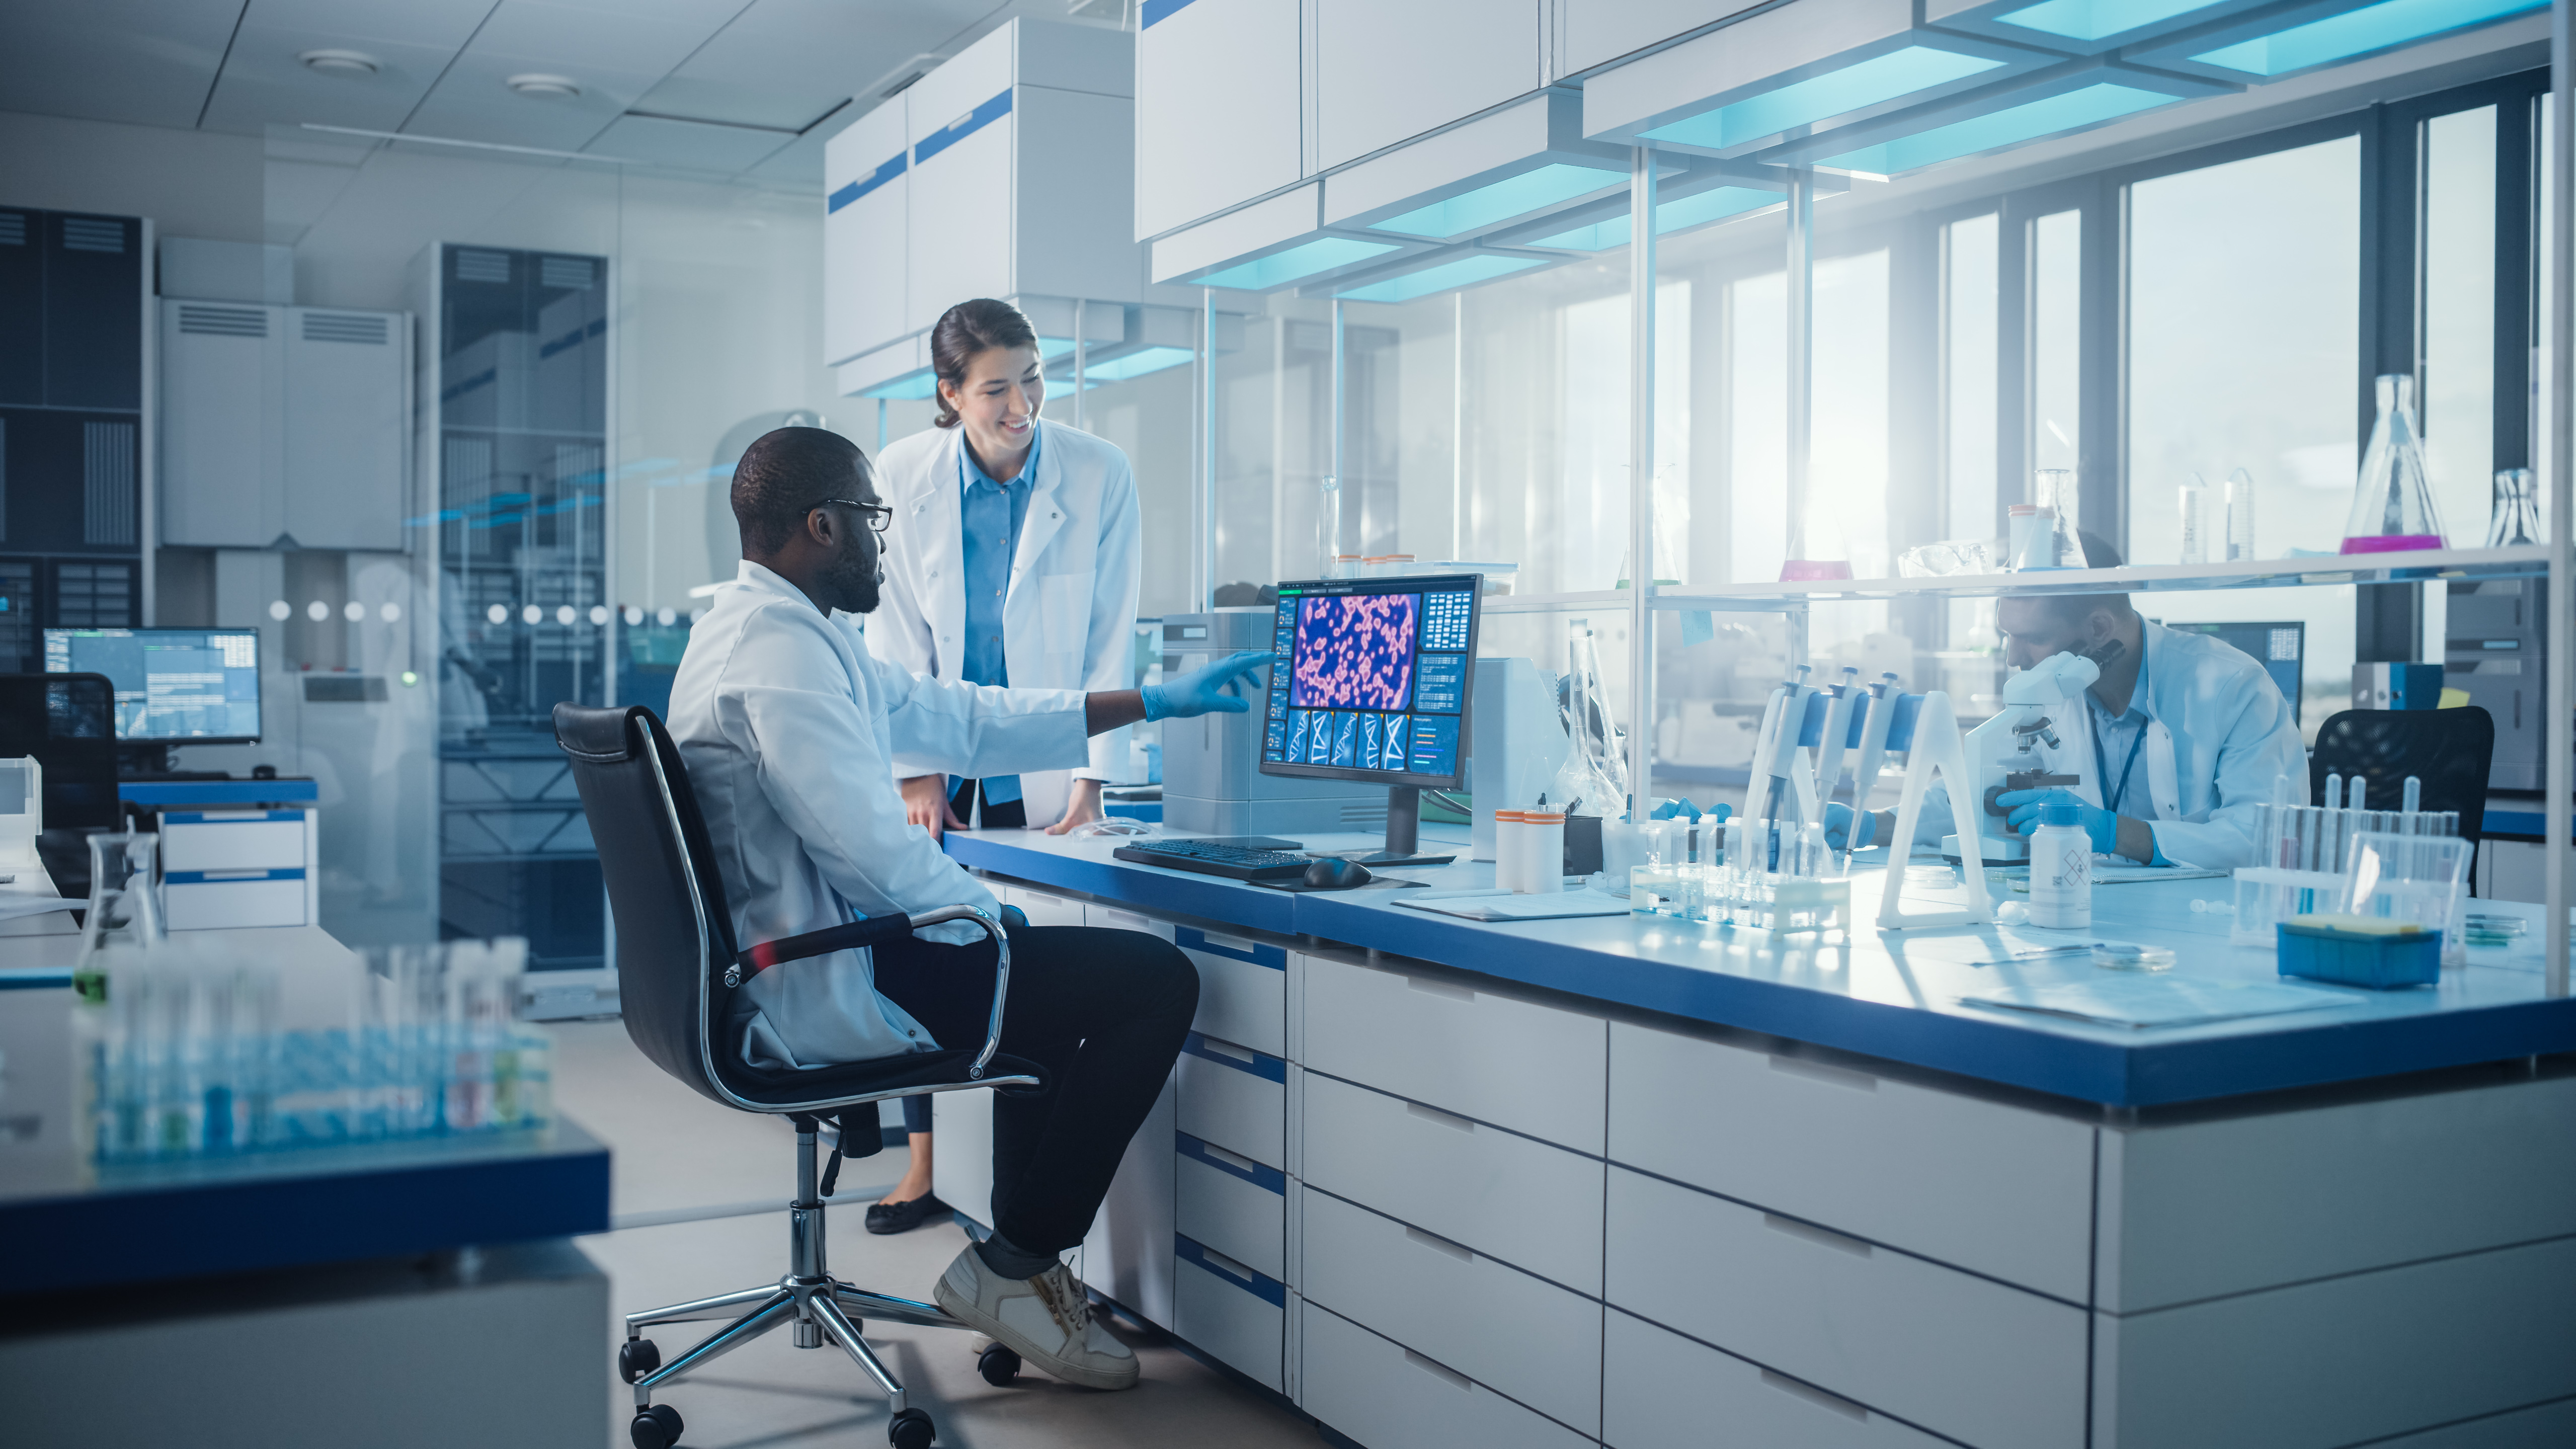 stock image of two people working in a high-tech lab